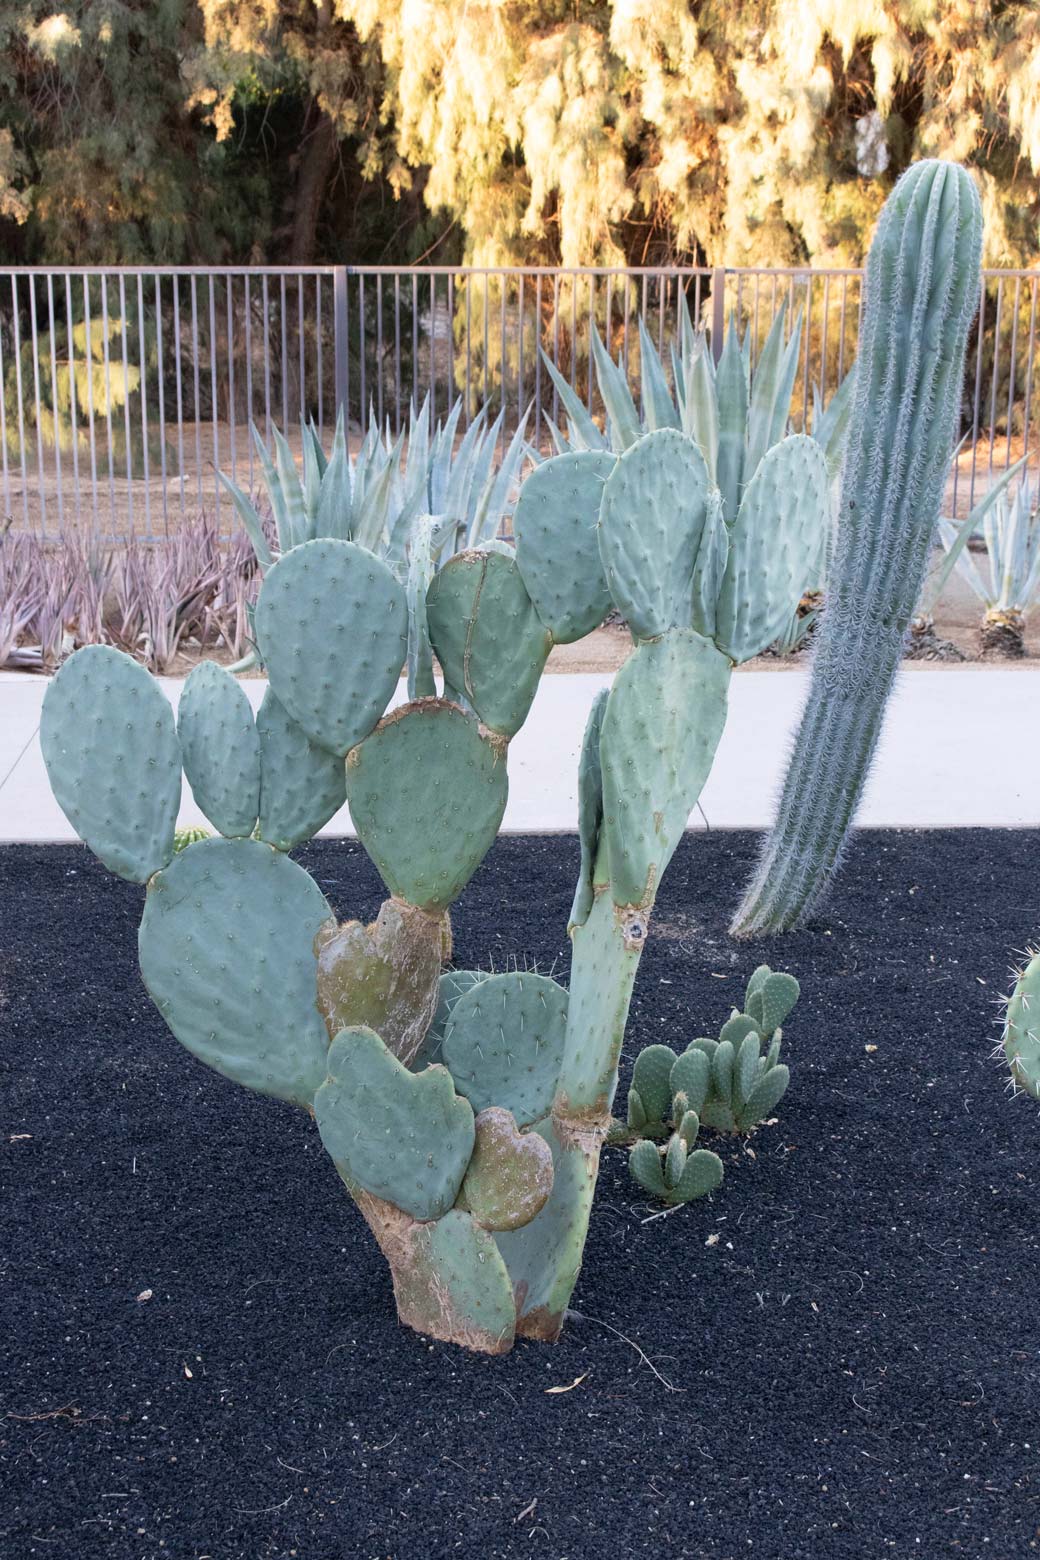 A Prickly Pear cactus in the specimen bed.